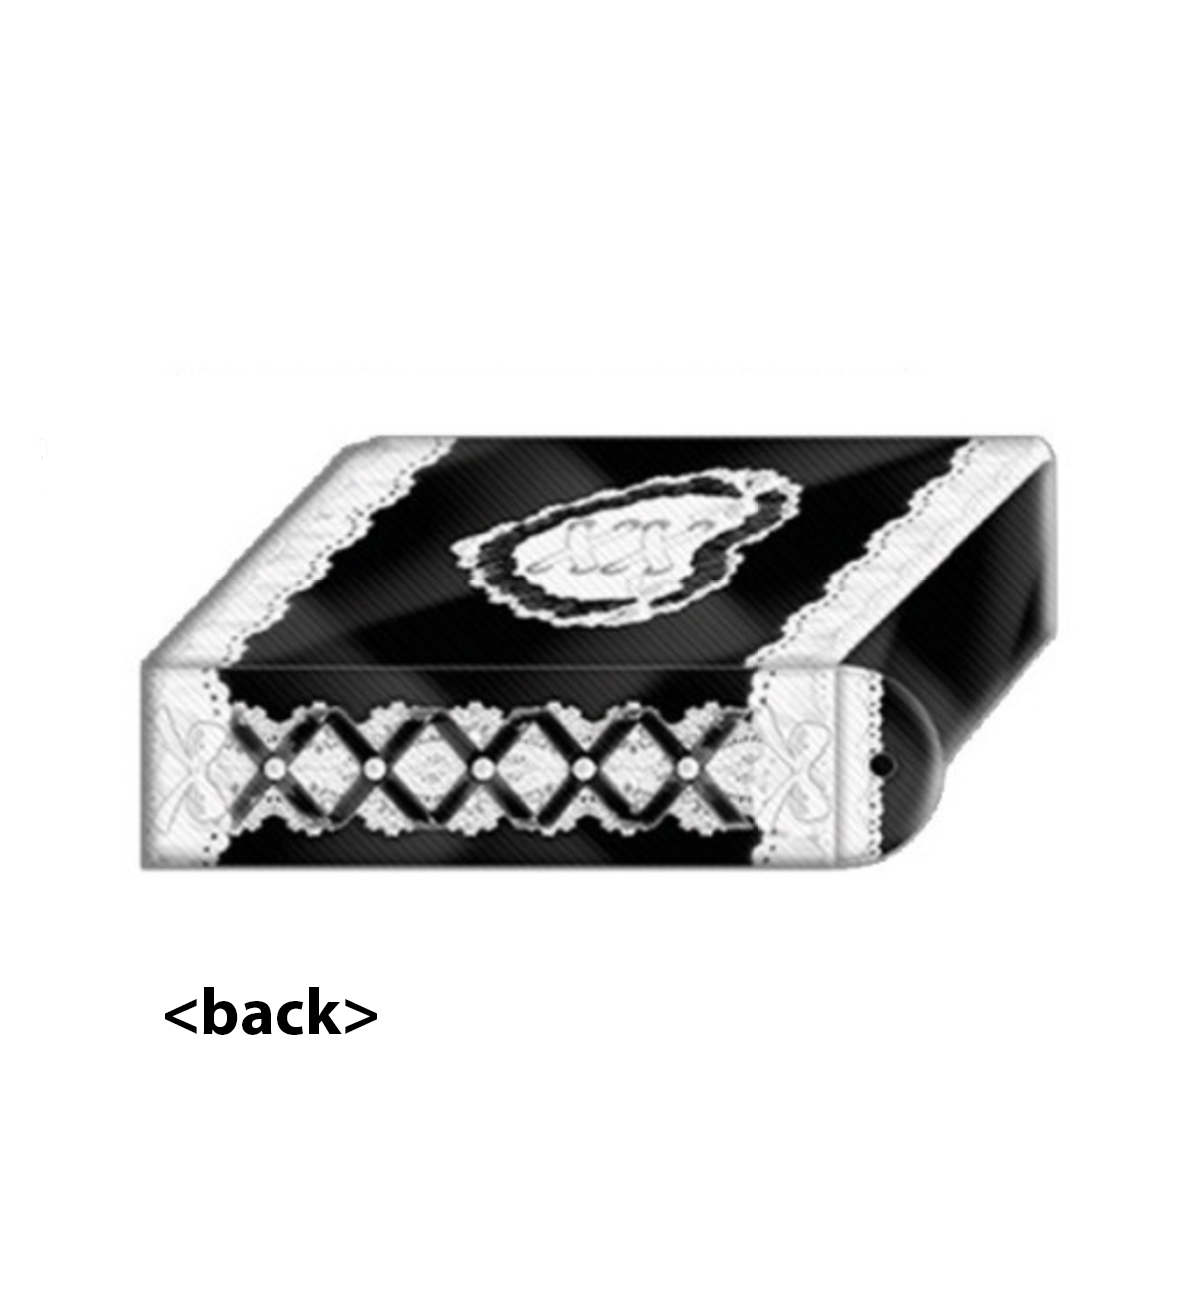 Black Lace Photocard Collect Case Holder [Black Heart Club]